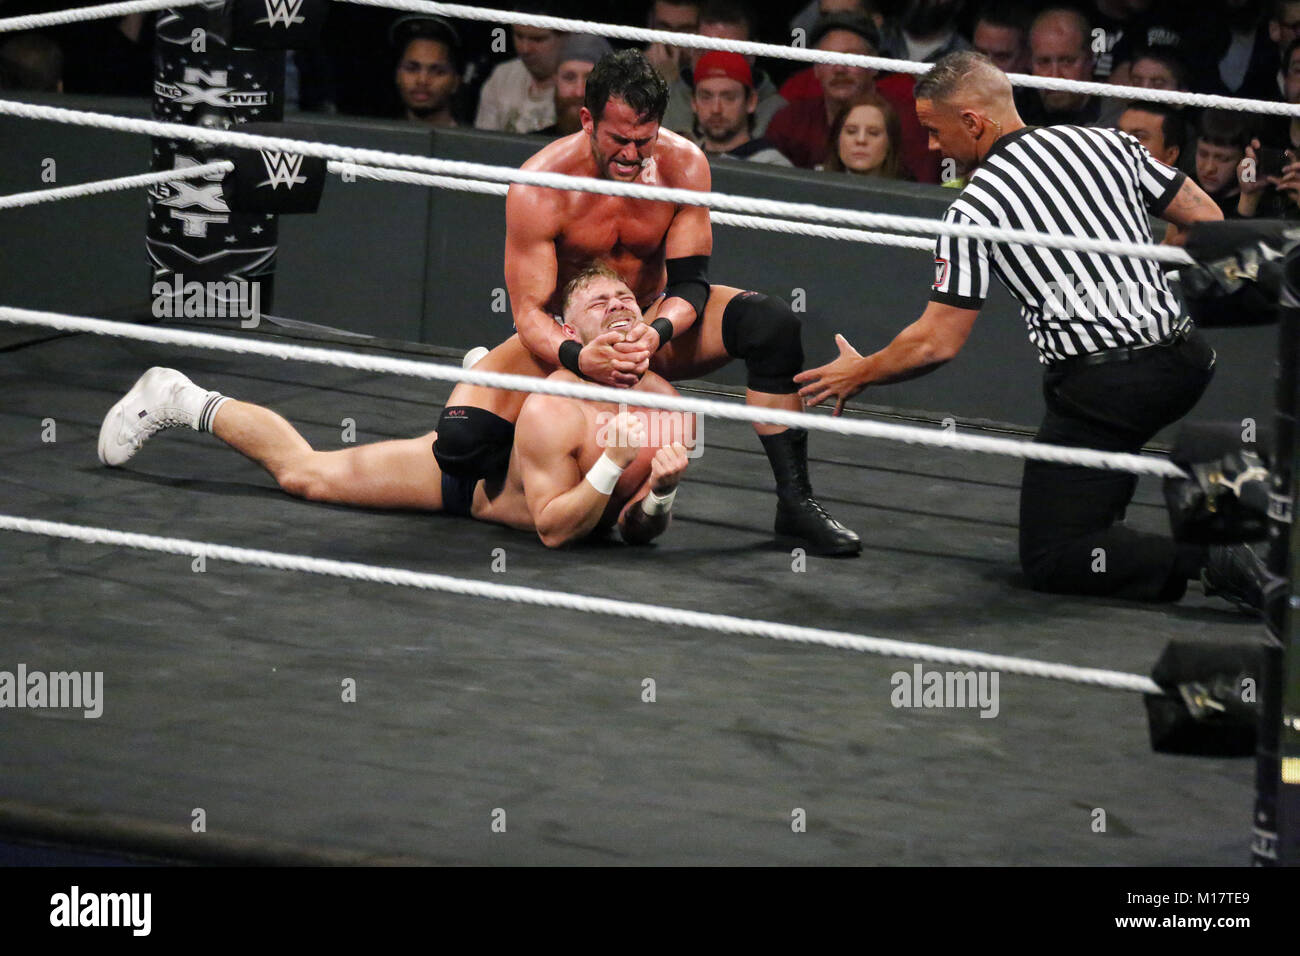 Philadelphia, PA, USA. 27th Jan, 2018. Roderick Strong wins match at WWE NXT Take Over at Wells Fargo Center in Philadelphia, Pa on January 27, 2018 Credit: Star Shooter/Media Punch/Alamy Live News Stock Photo